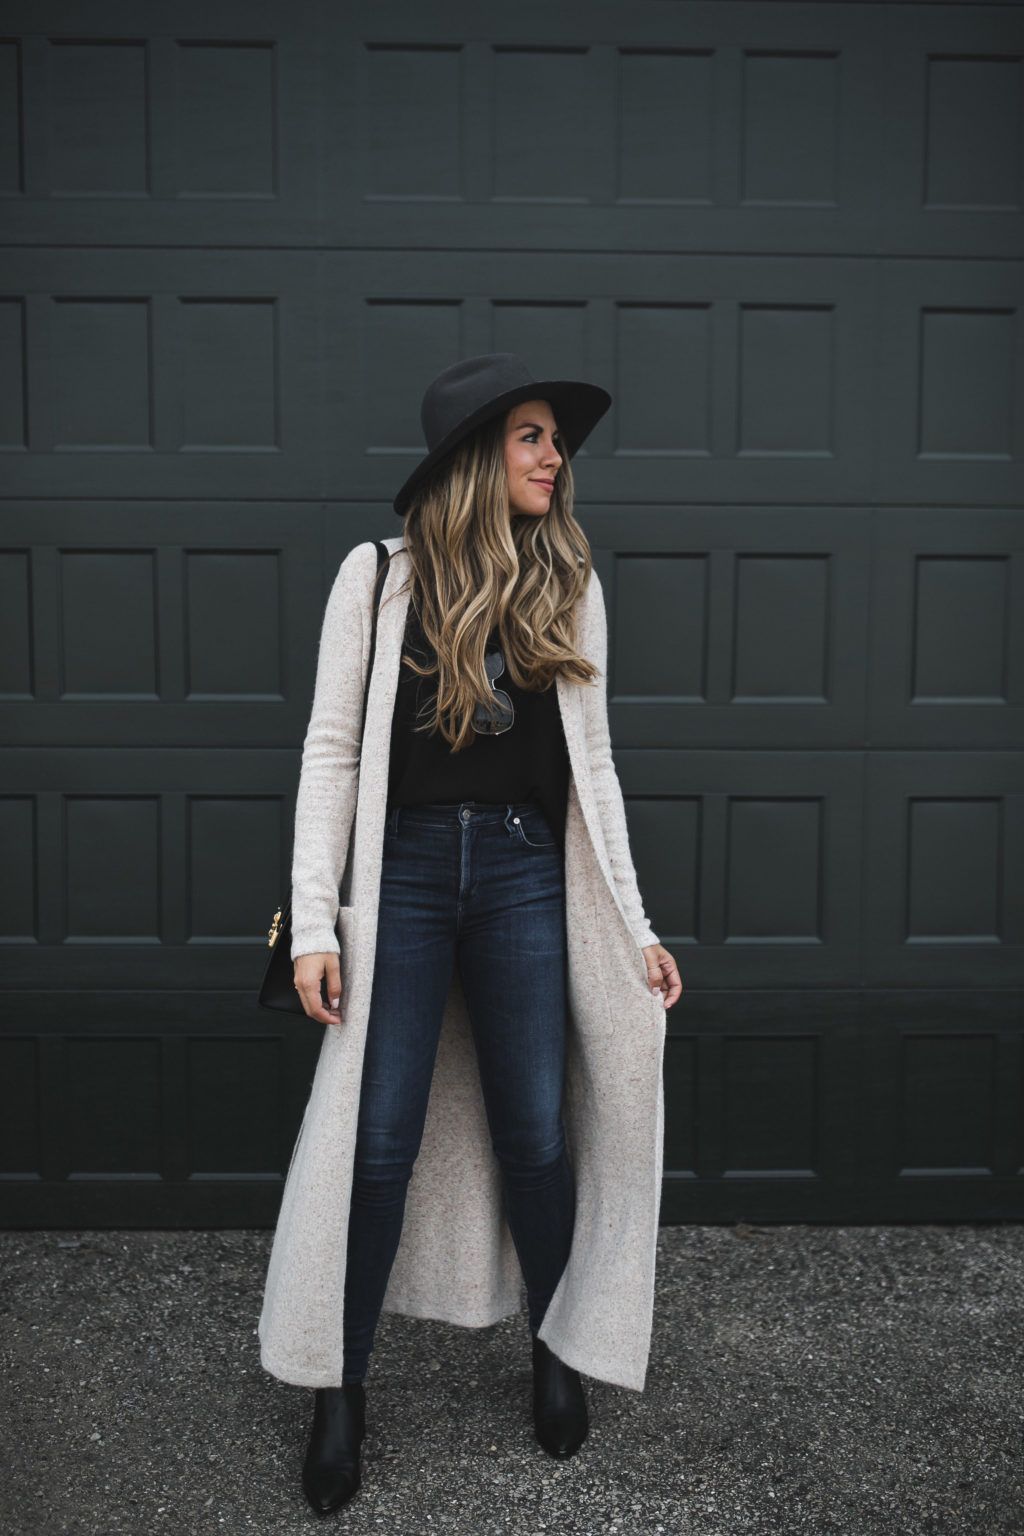 Layer Up in Style: Long Cardigans for Effortless Chic